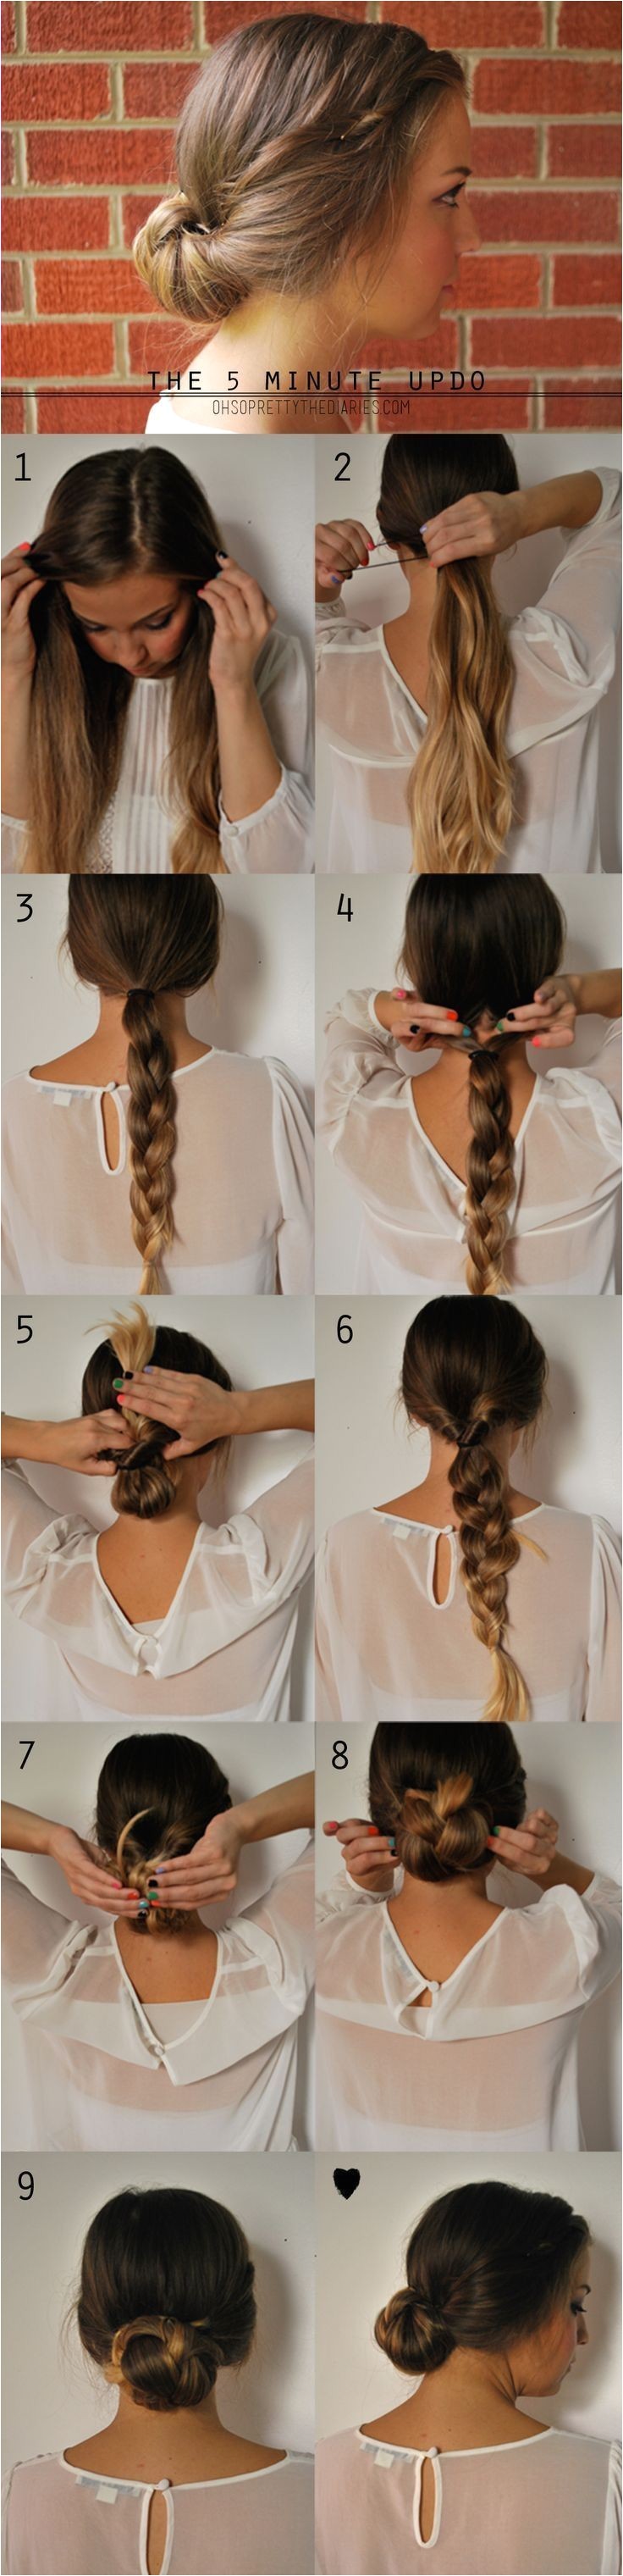 16 pretty long hairstyles with tutorials